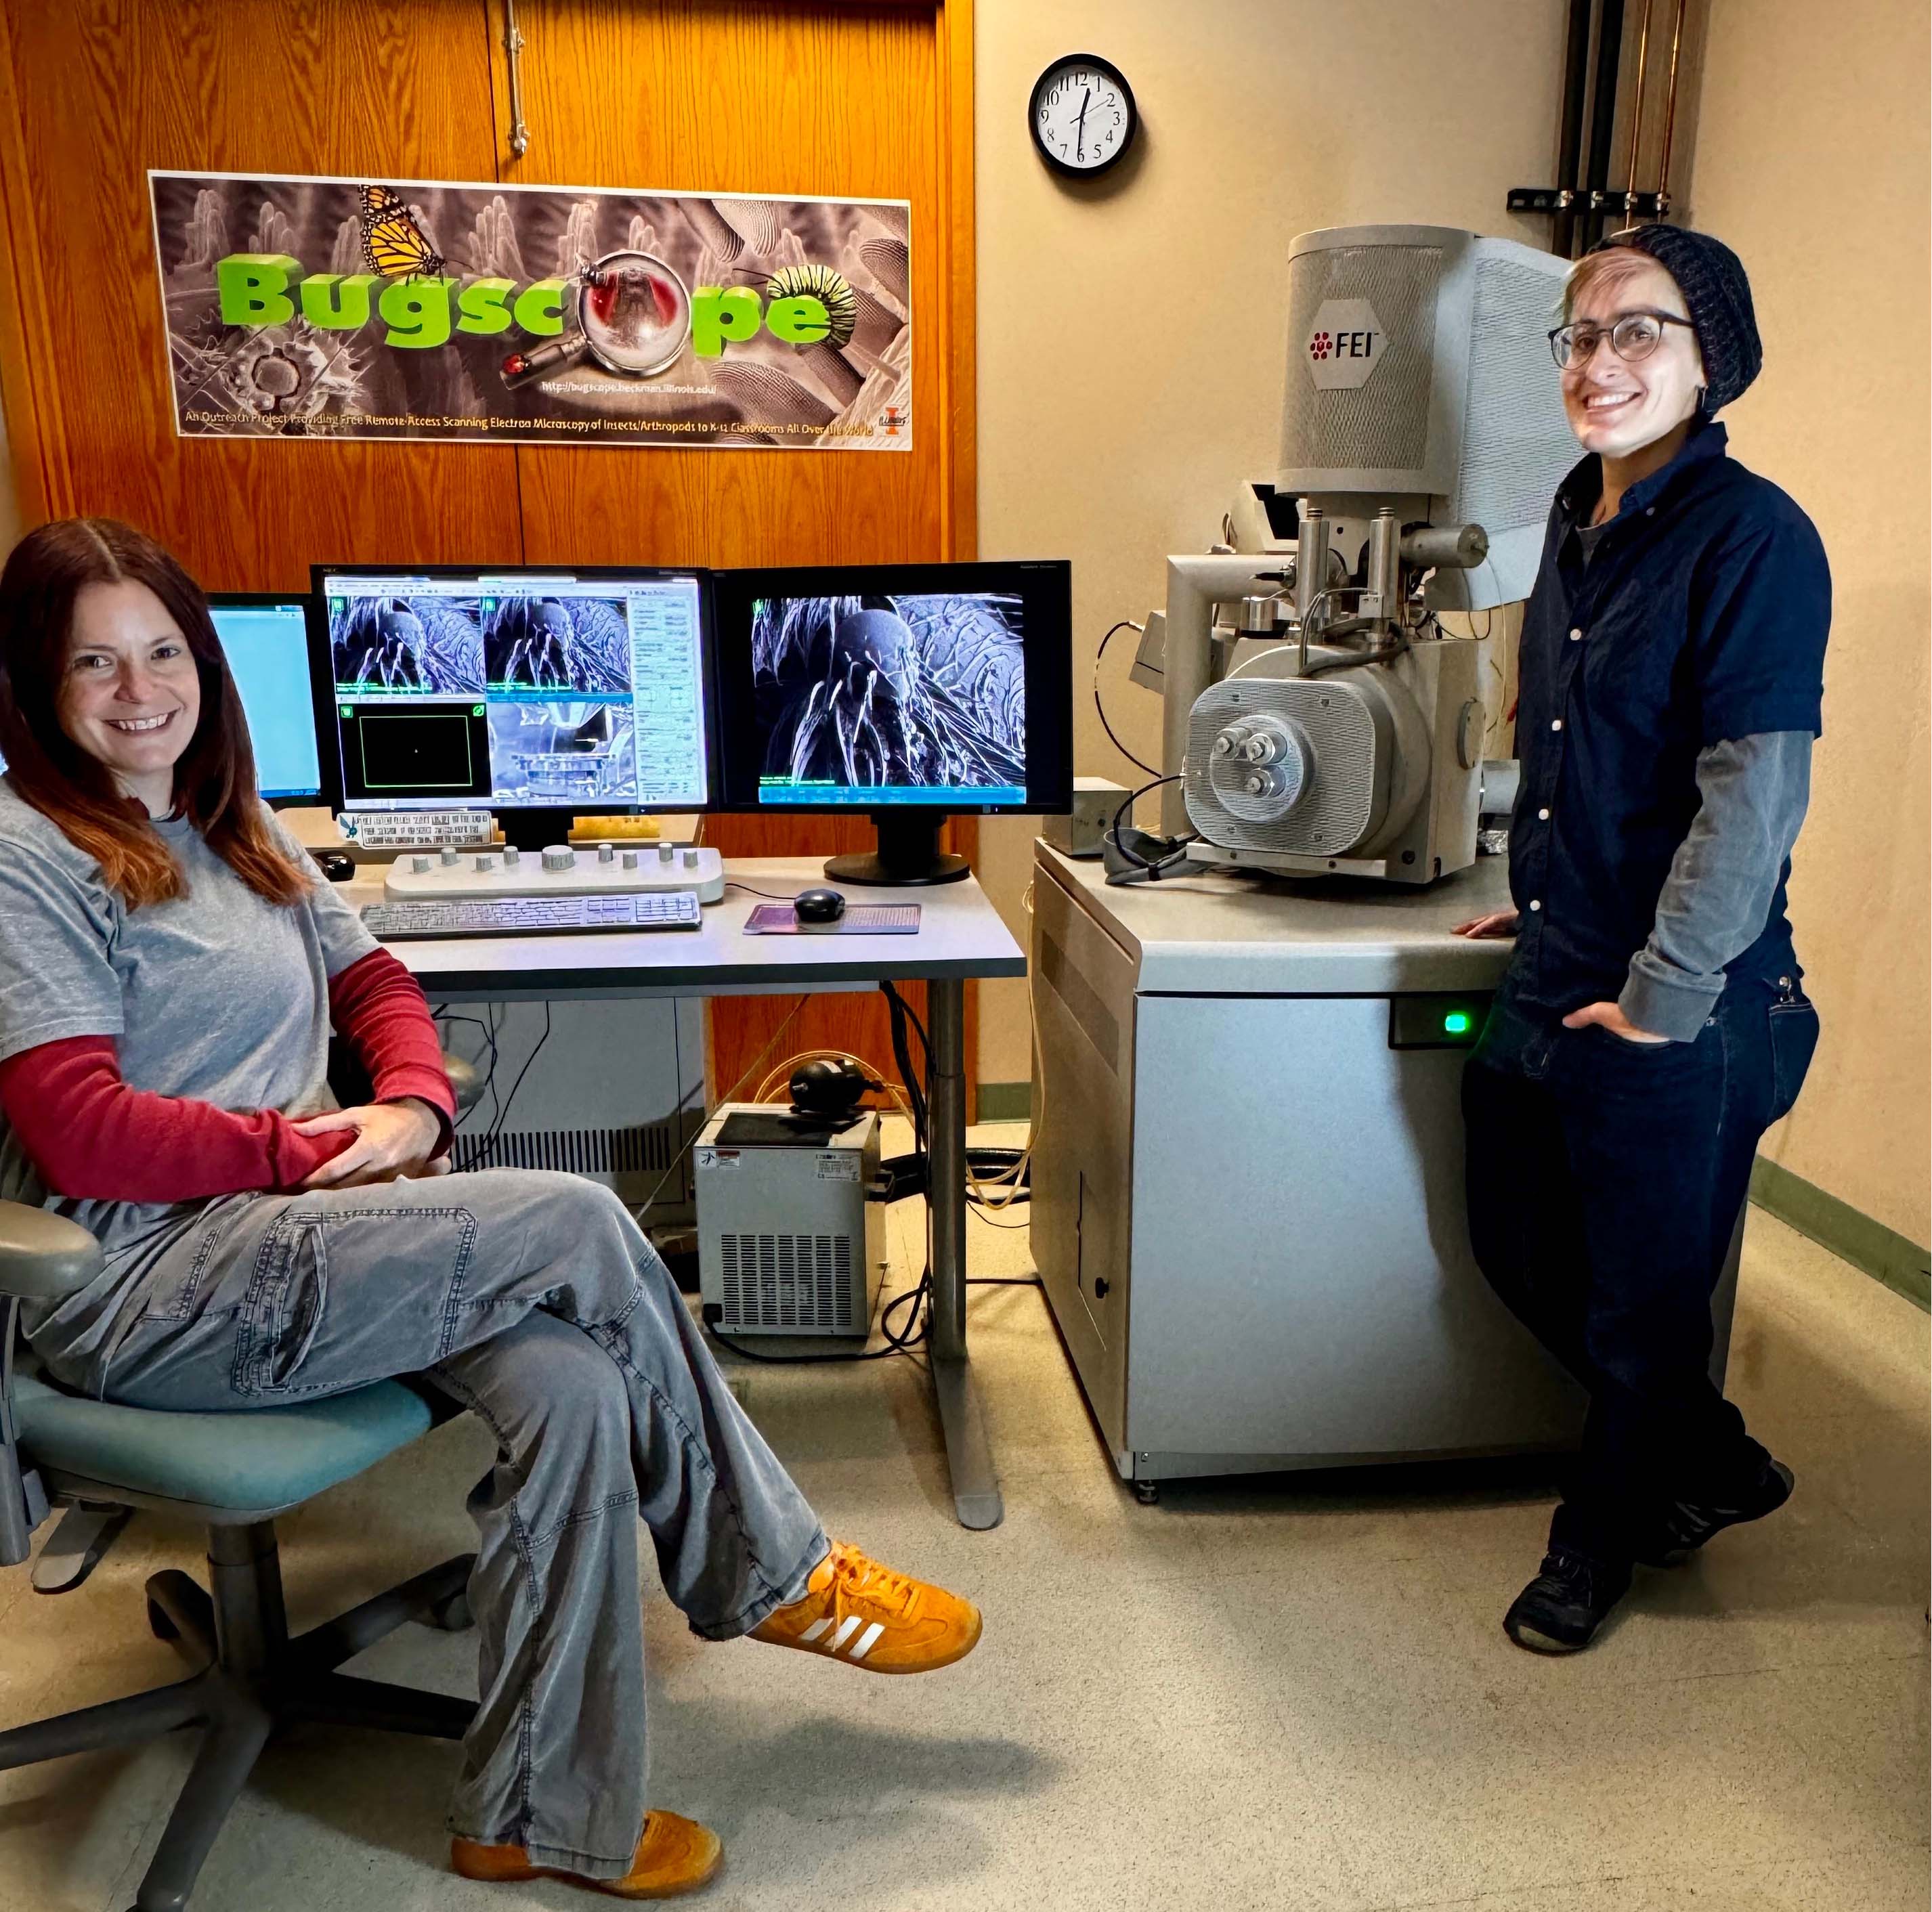 Cate Wallace (left) and T. Josek (right) pose in front of the scanning electron microscope and a Bugscope sign in the Beckman Institute Microscopy Suite.